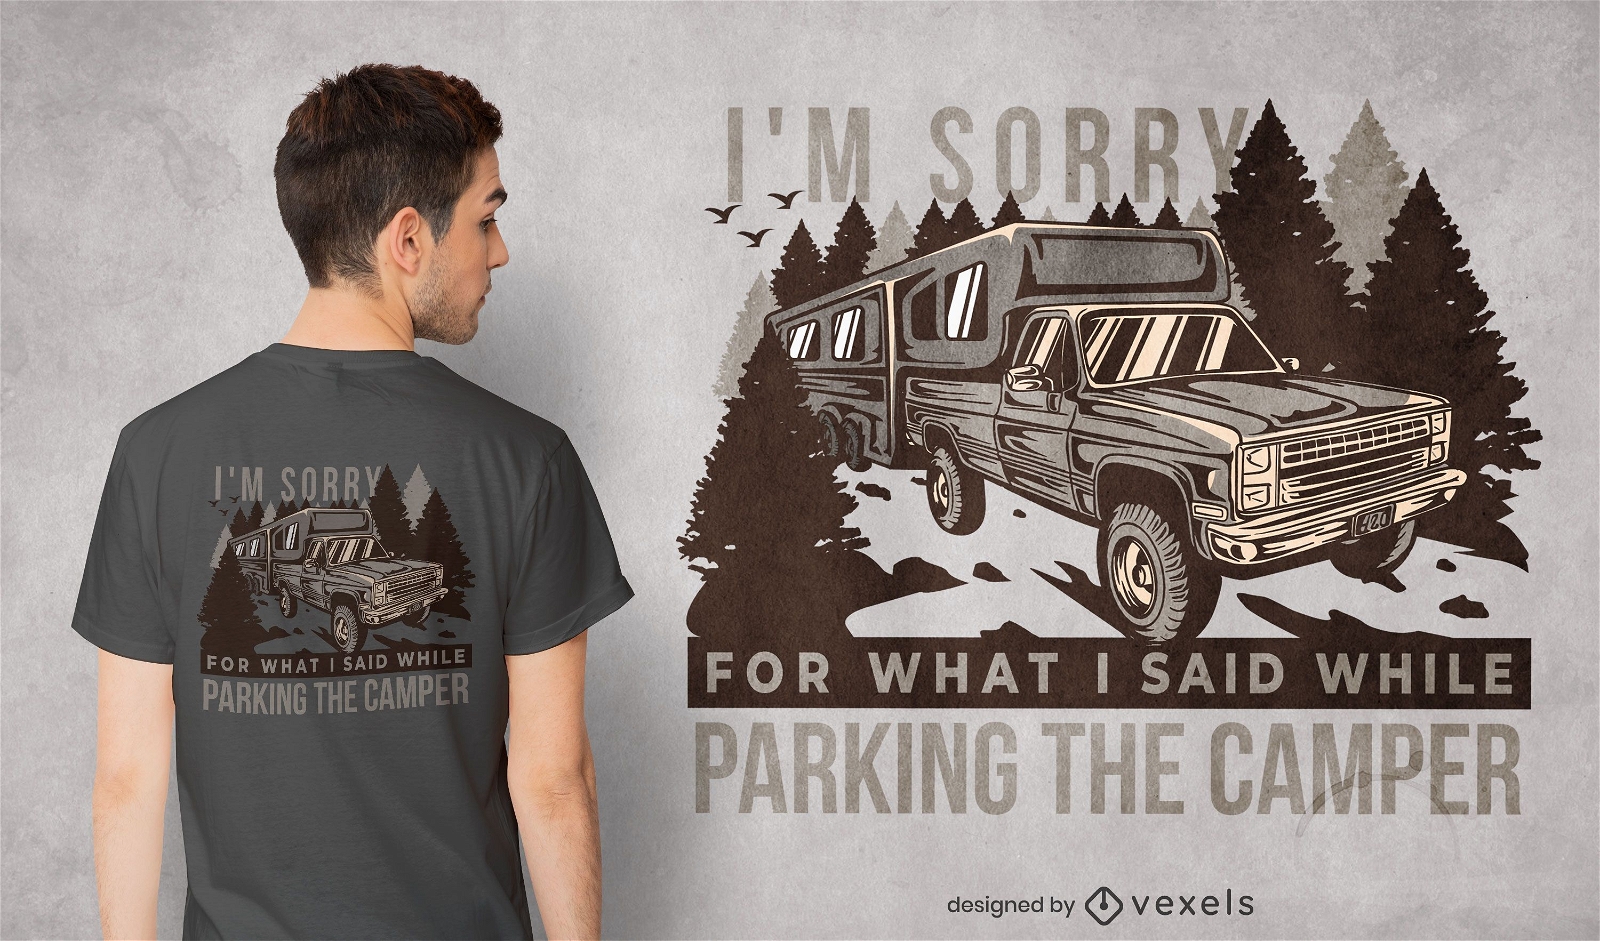 Parking the camper quote t-shirt design